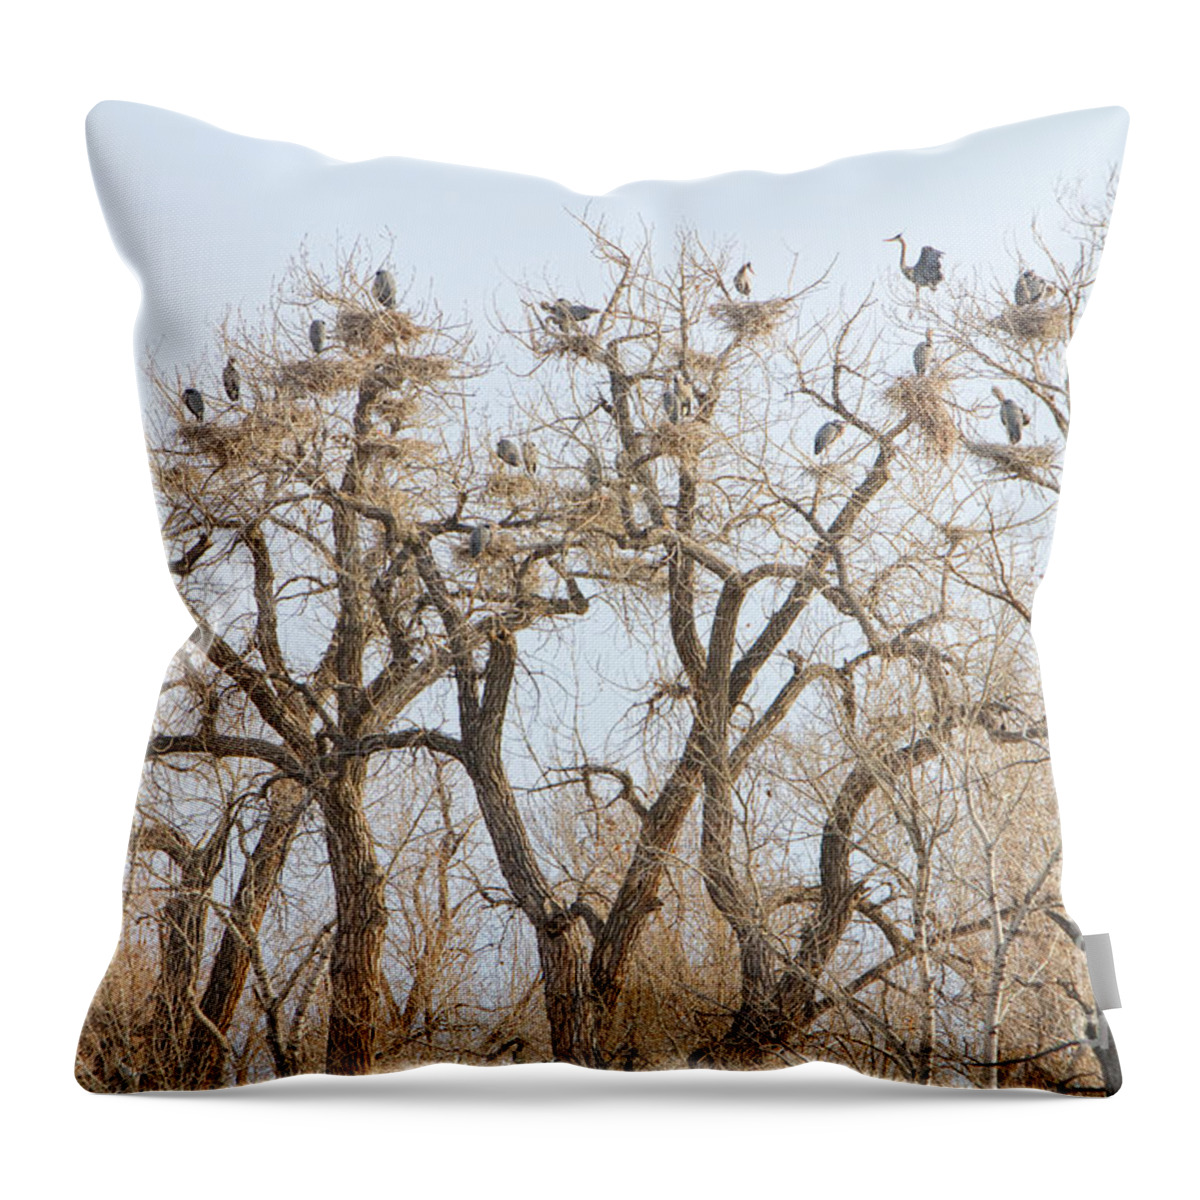 Animals Throw Pillow featuring the photograph Great Blue Heron Colony by James BO Insogna